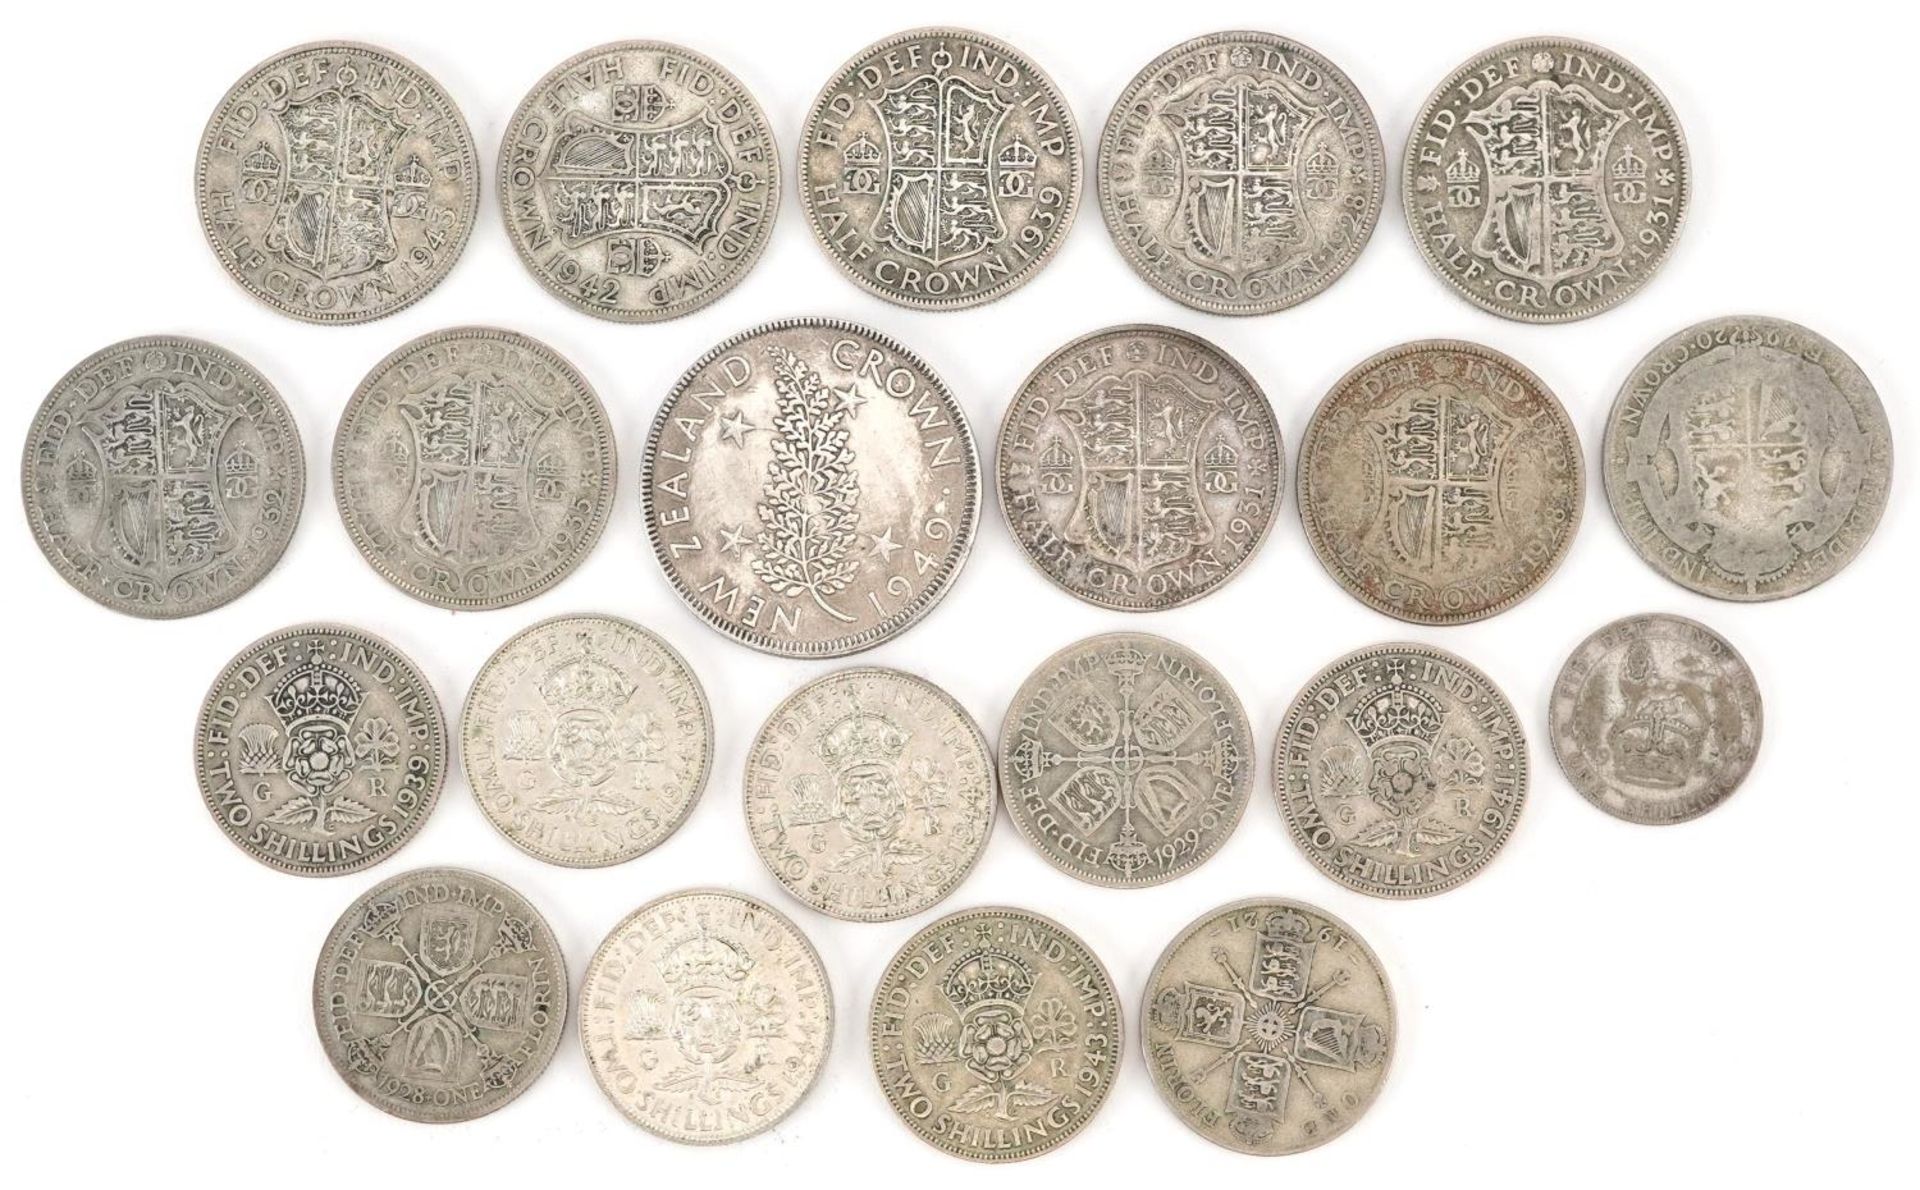 British and New Zealand coinage including half crowns and florins, 240g